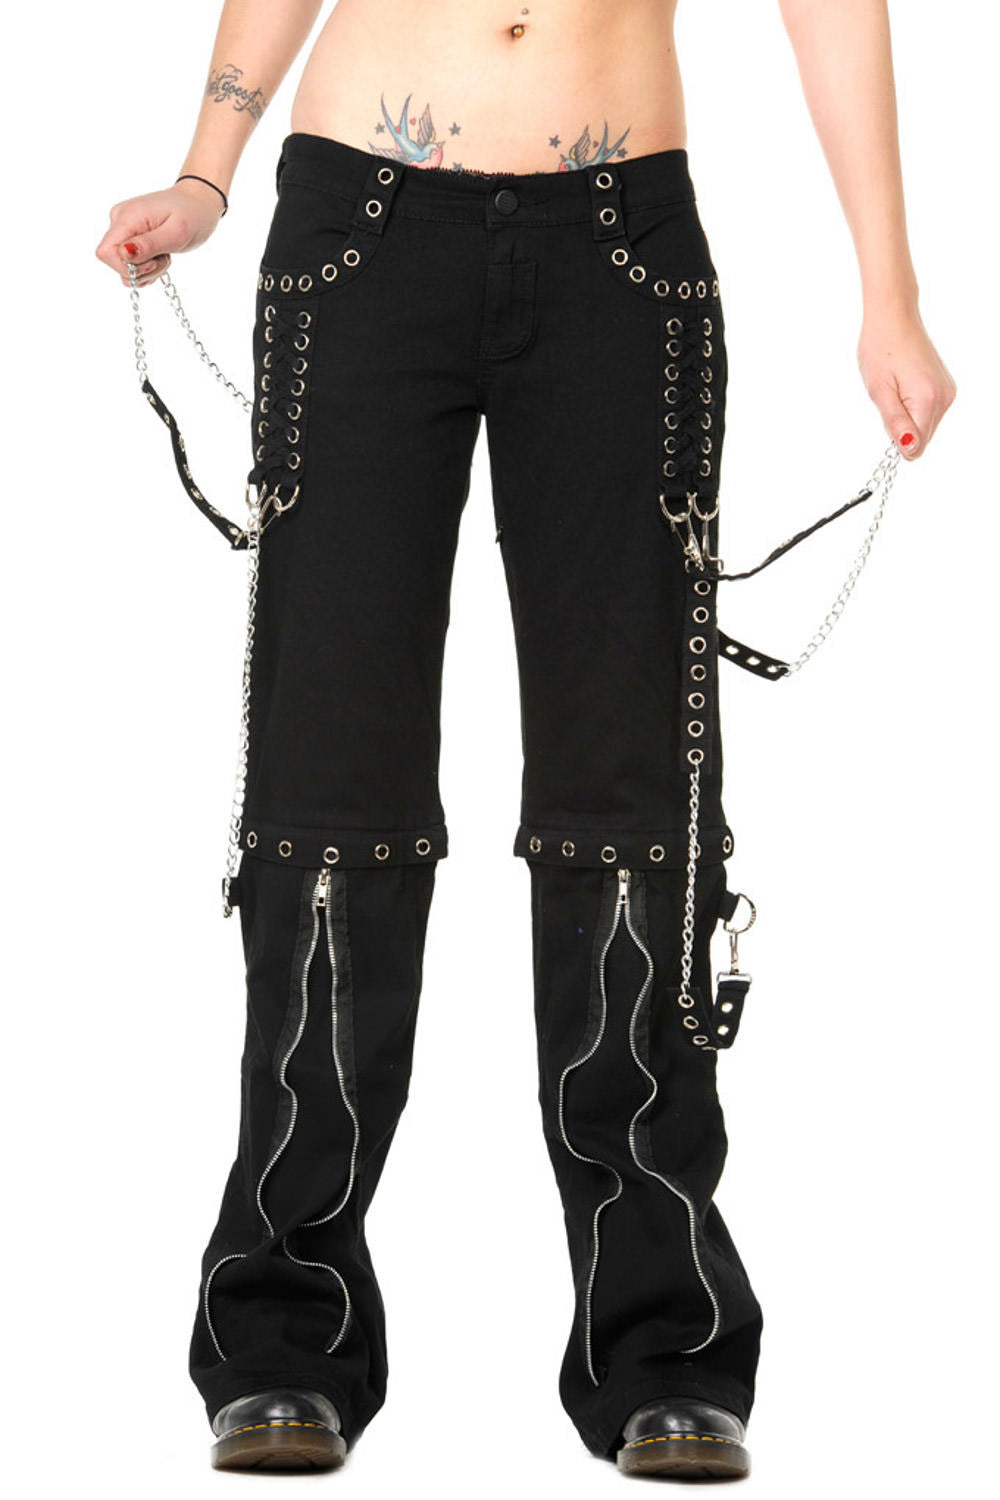 Banned Alternative Hellbound Black Punk Chain Trousers